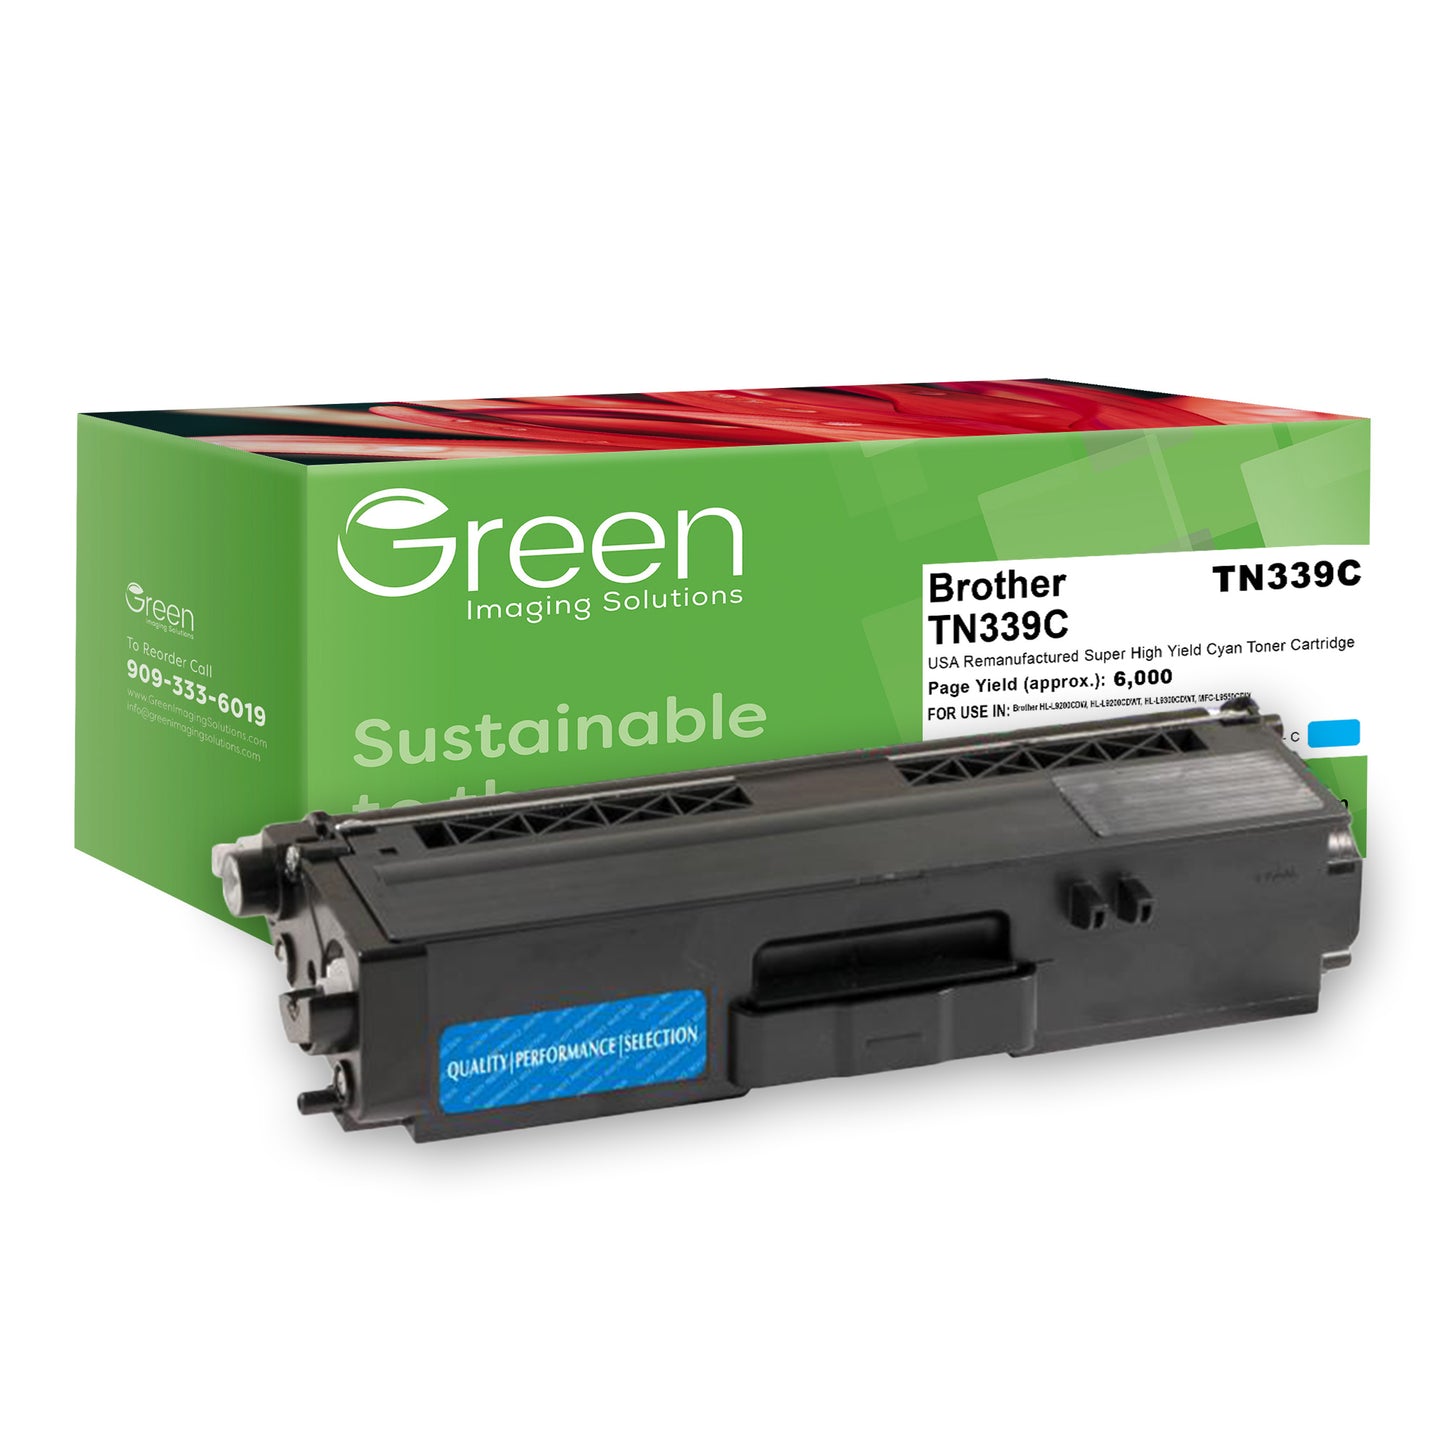 Green Imaging Solutions USA Remanufactured Super High Yield Cyan Toner Cartridge for Brother TN339